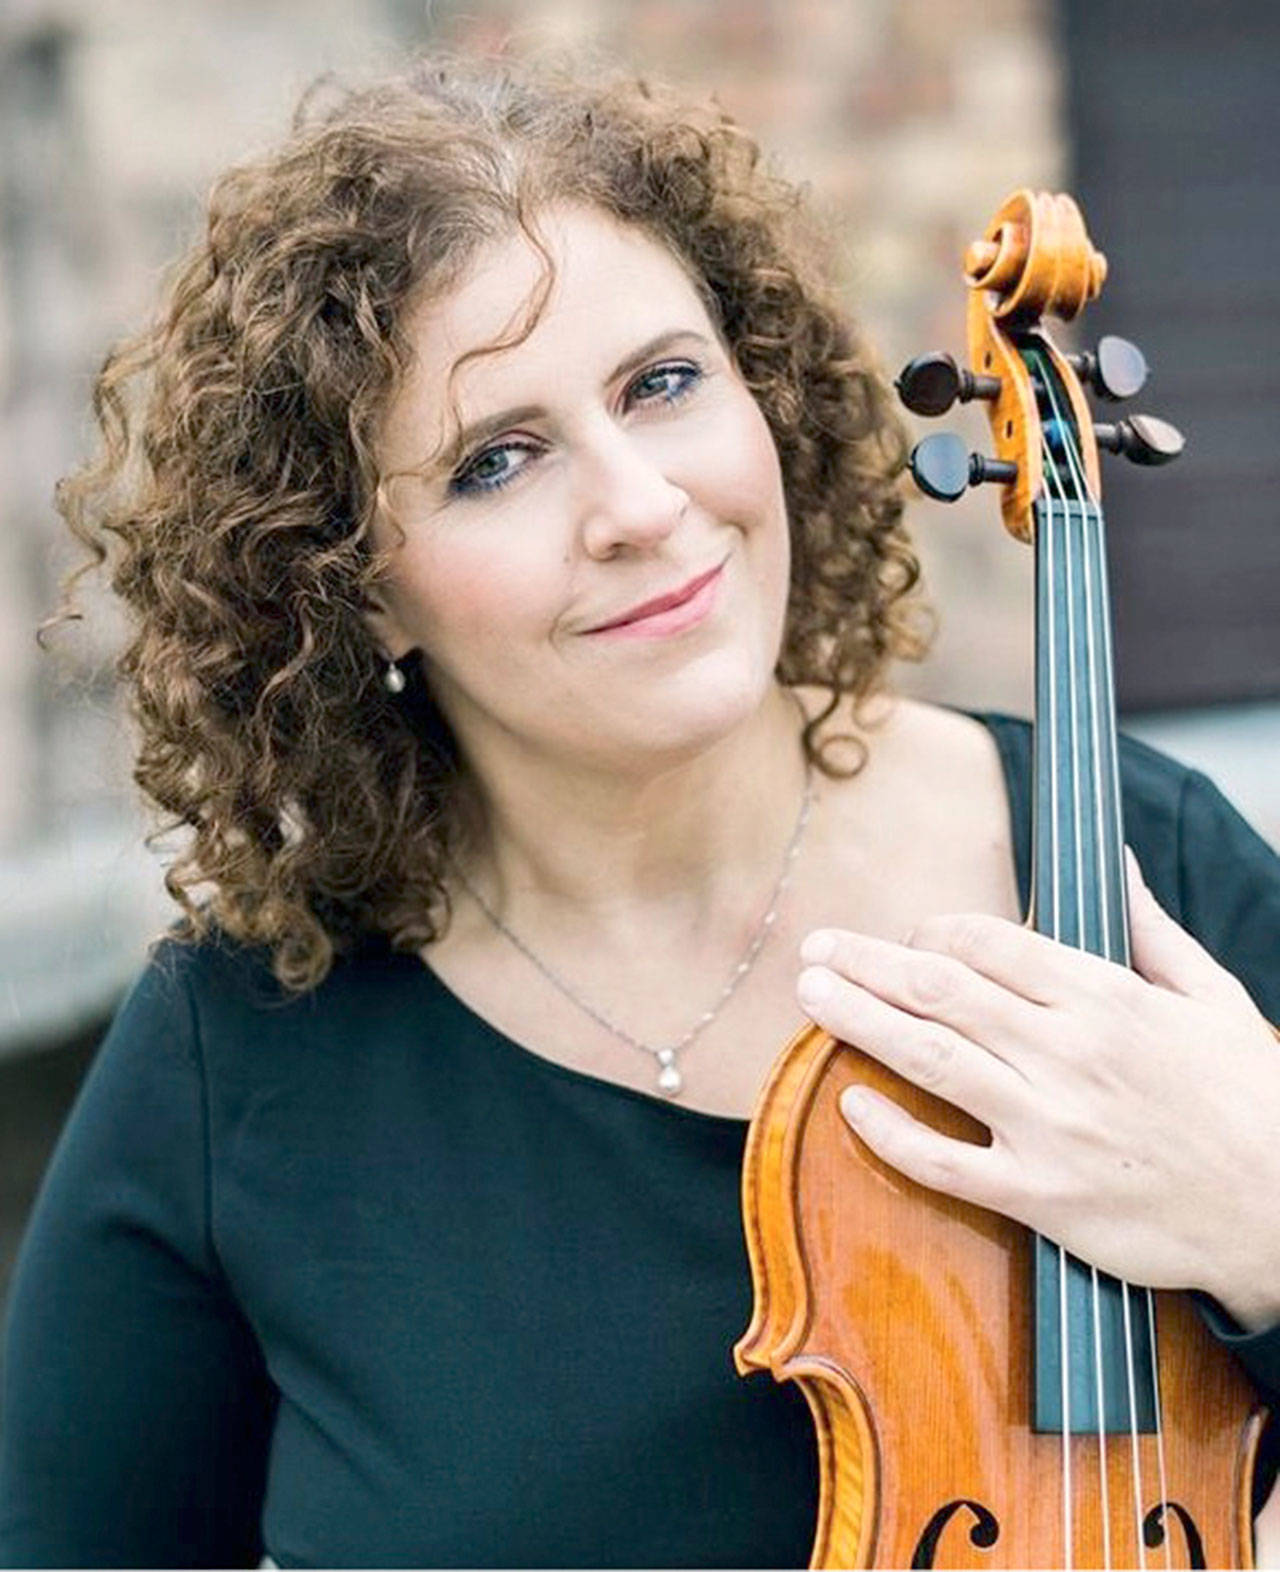 Violist Cheryl Landry Swoboda returns to her hometown of Port Angeles for a concert of Brahms, Bartok and Berlioz this Saturday.